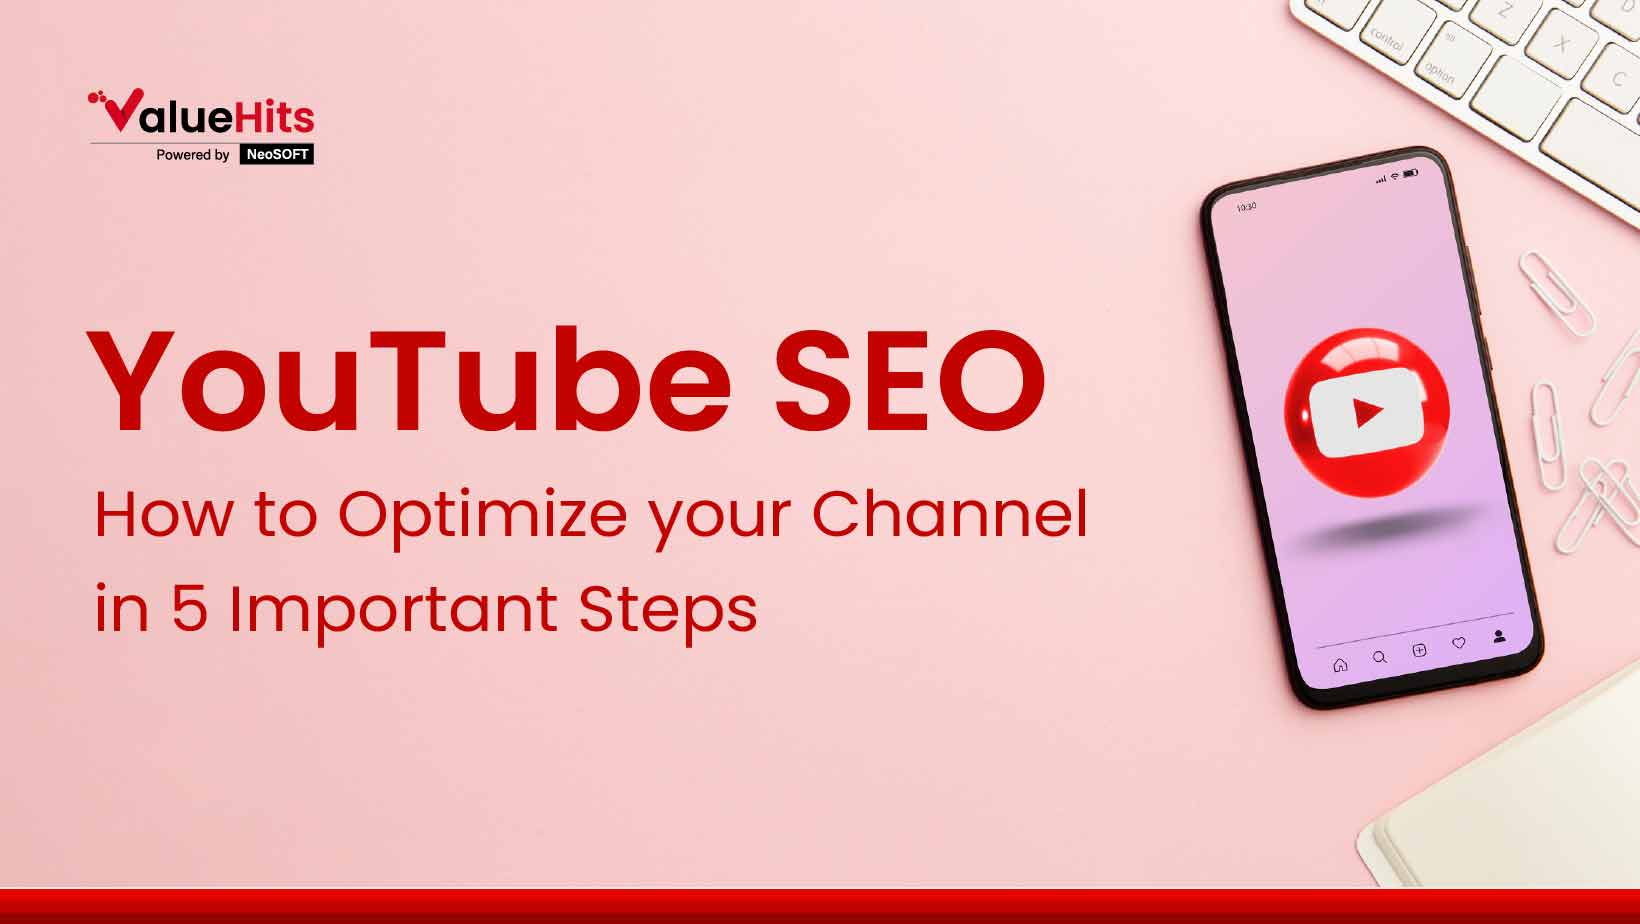 YouTube SEO: How to Optimize your Channel in 5 Important Steps